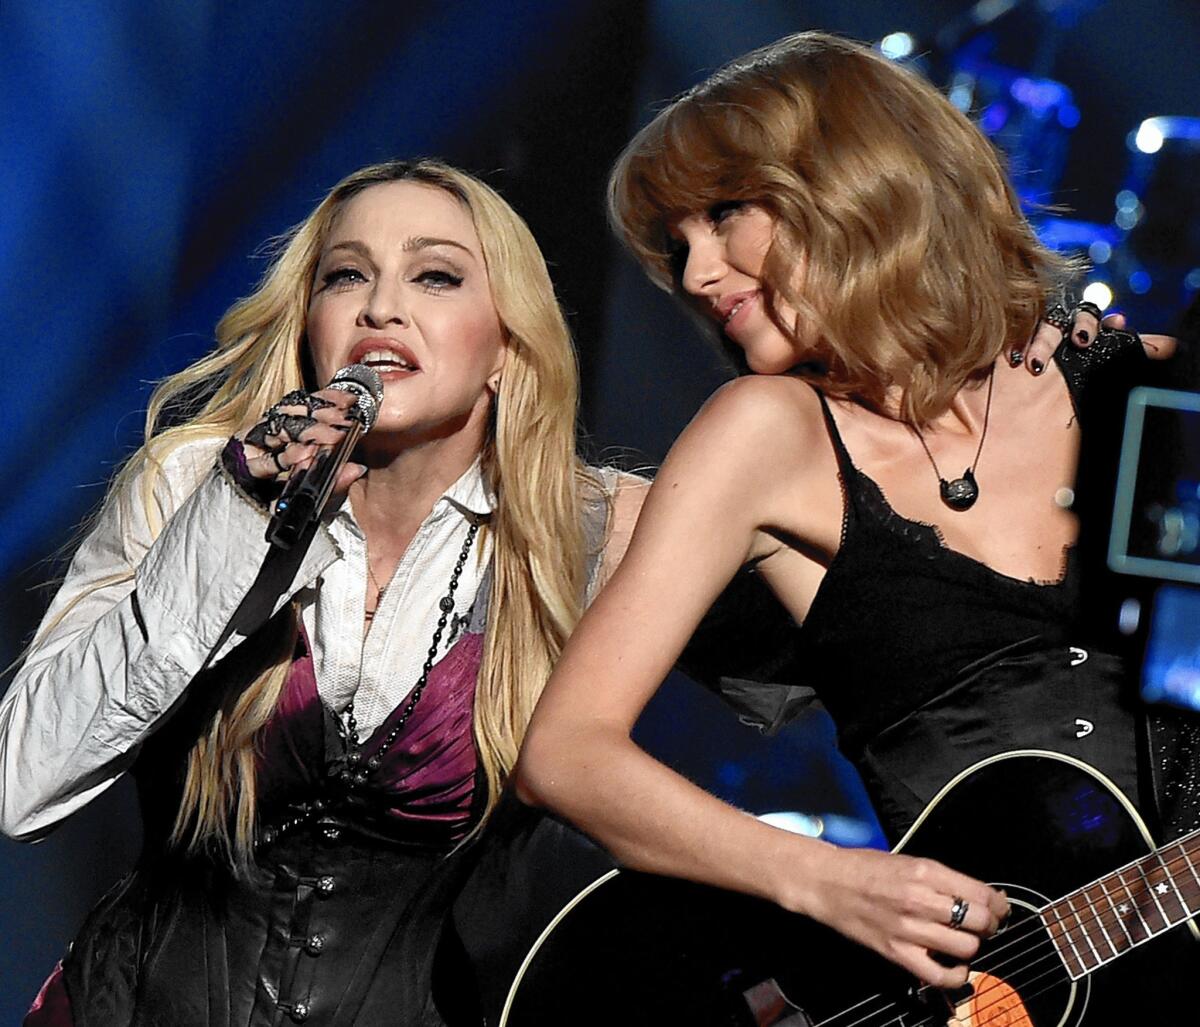 Madonna, left, and Taylor Swift perform "Ghost Town" during the 2015 iHeartRadio Music Awards at the Shrine Auditorium on March 29, 2015, in Los Angeles.